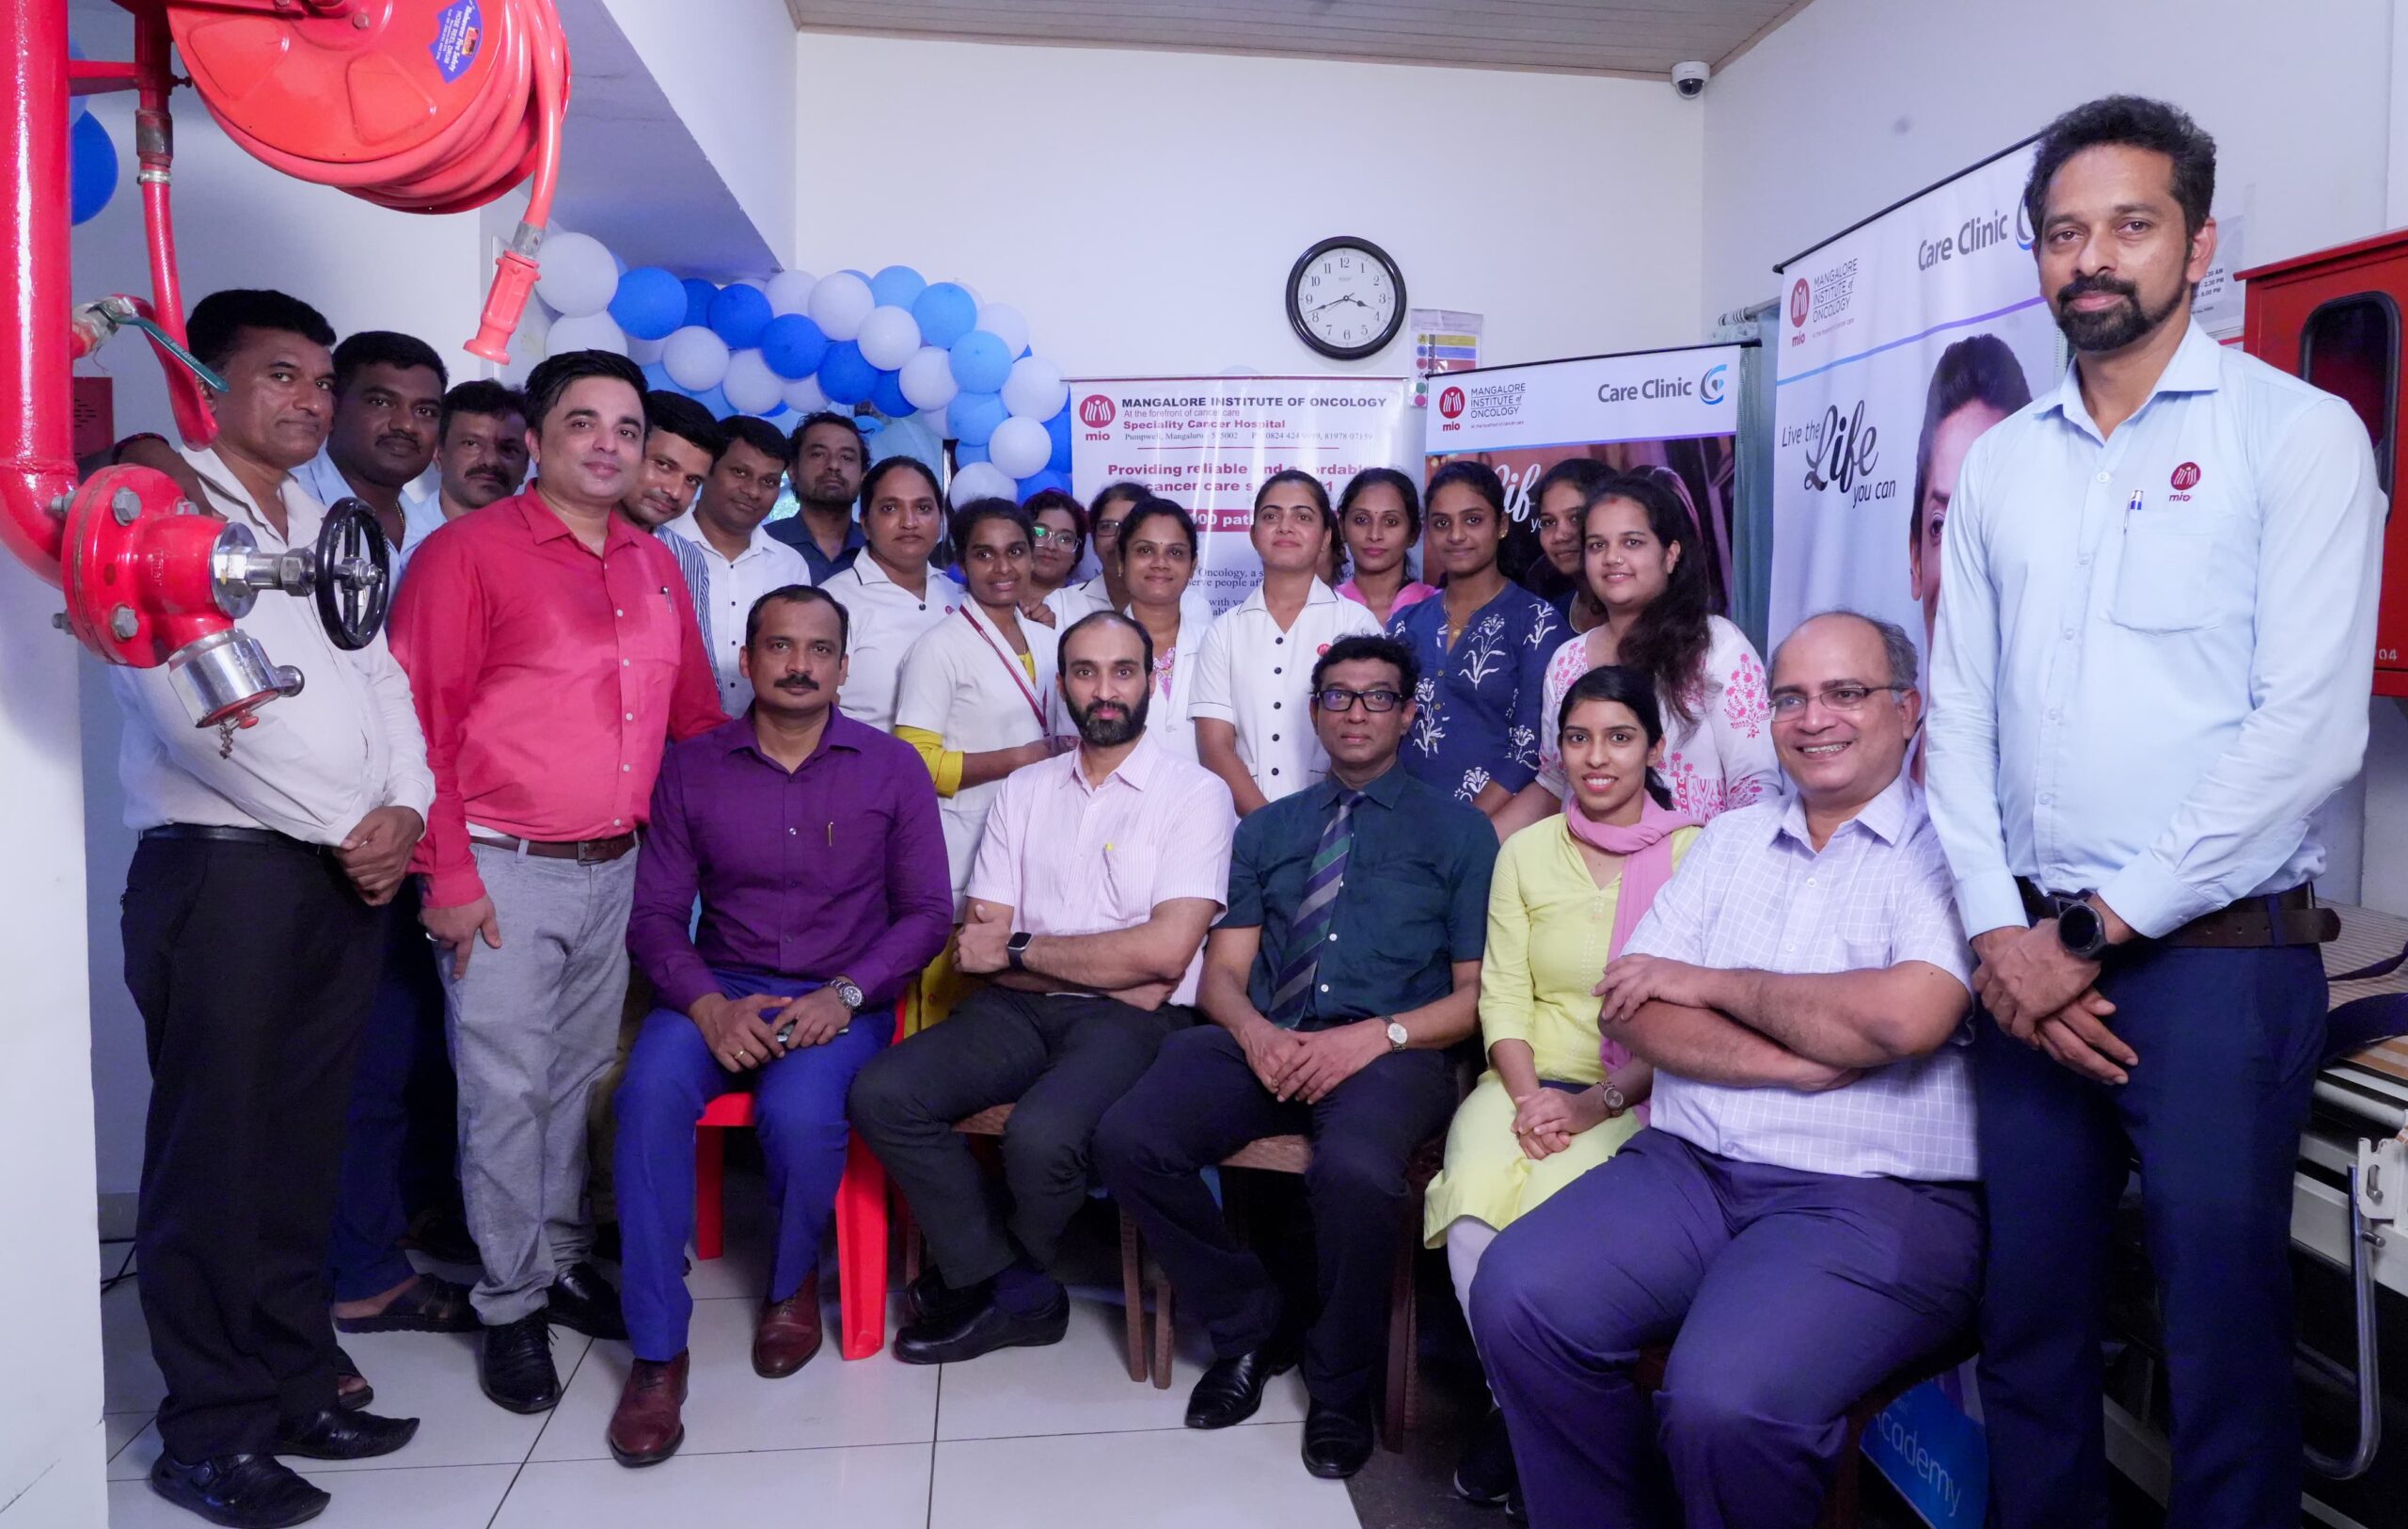 New Colostomy and Ileostomy Care Clinic Opens at M.I.O Hospital, Mangalore: Pioneering Patient Education and Support